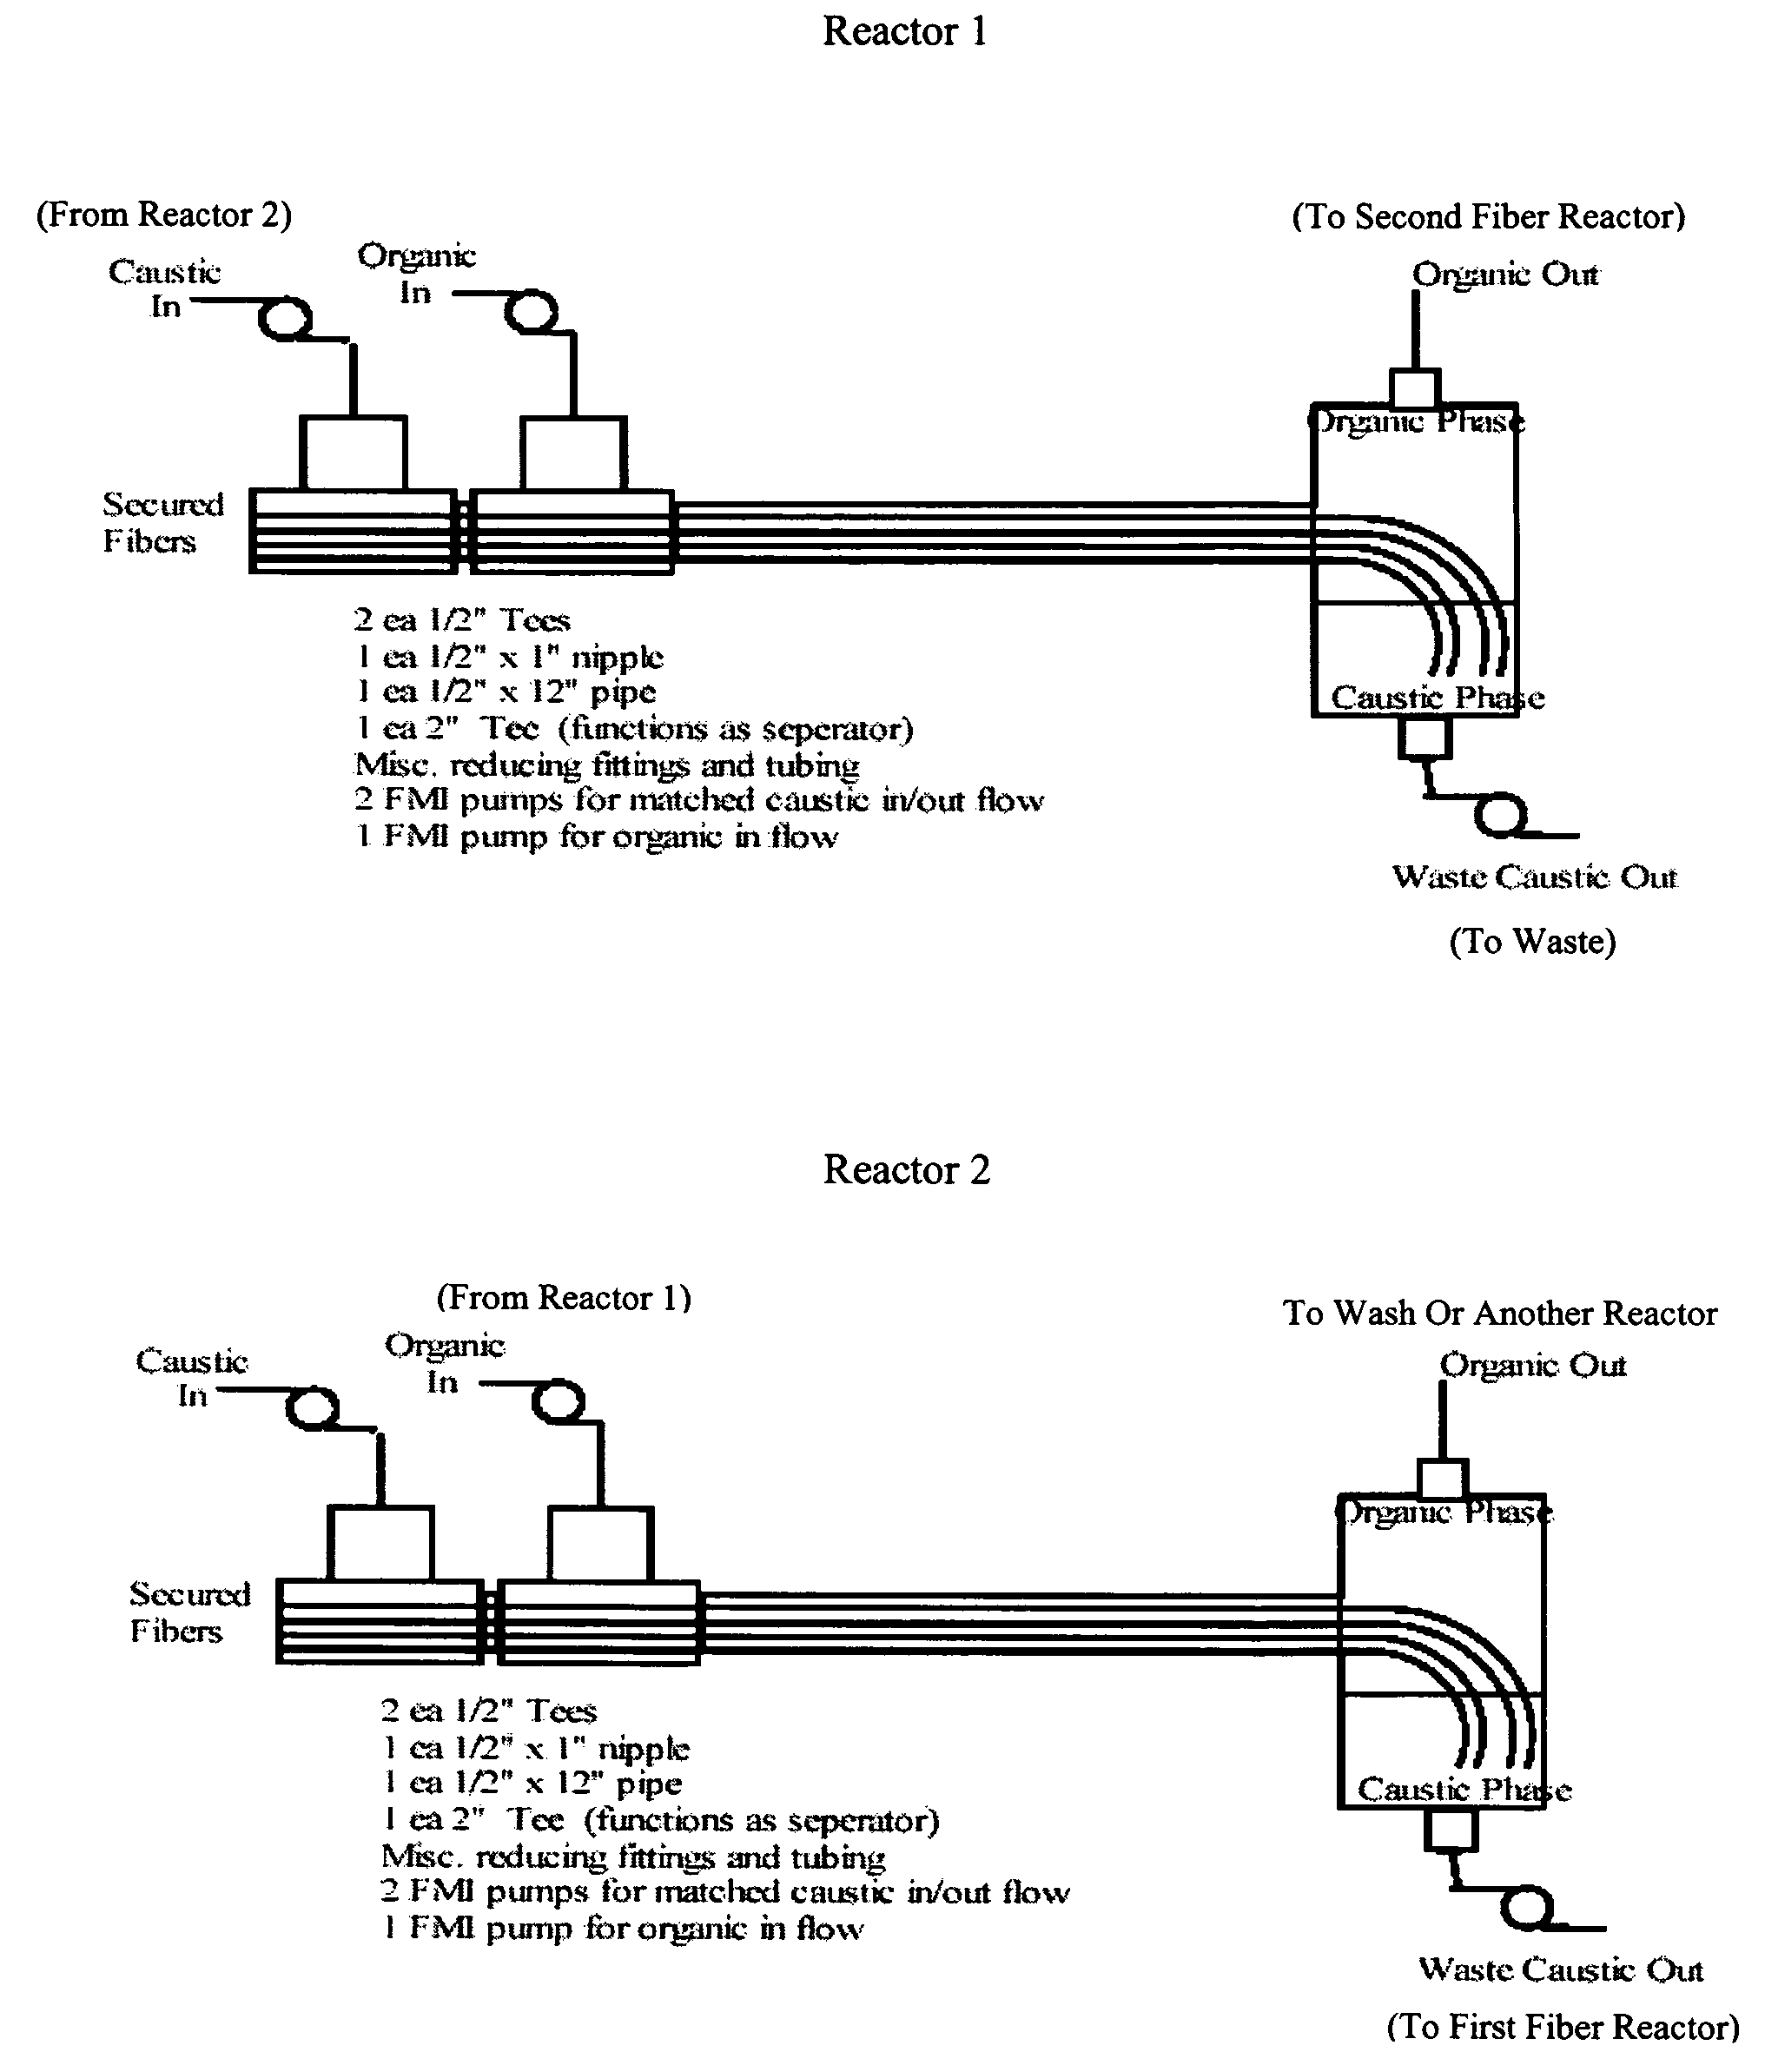 Fiber film reactors to effect separation and reaction between two immiscible reaction components